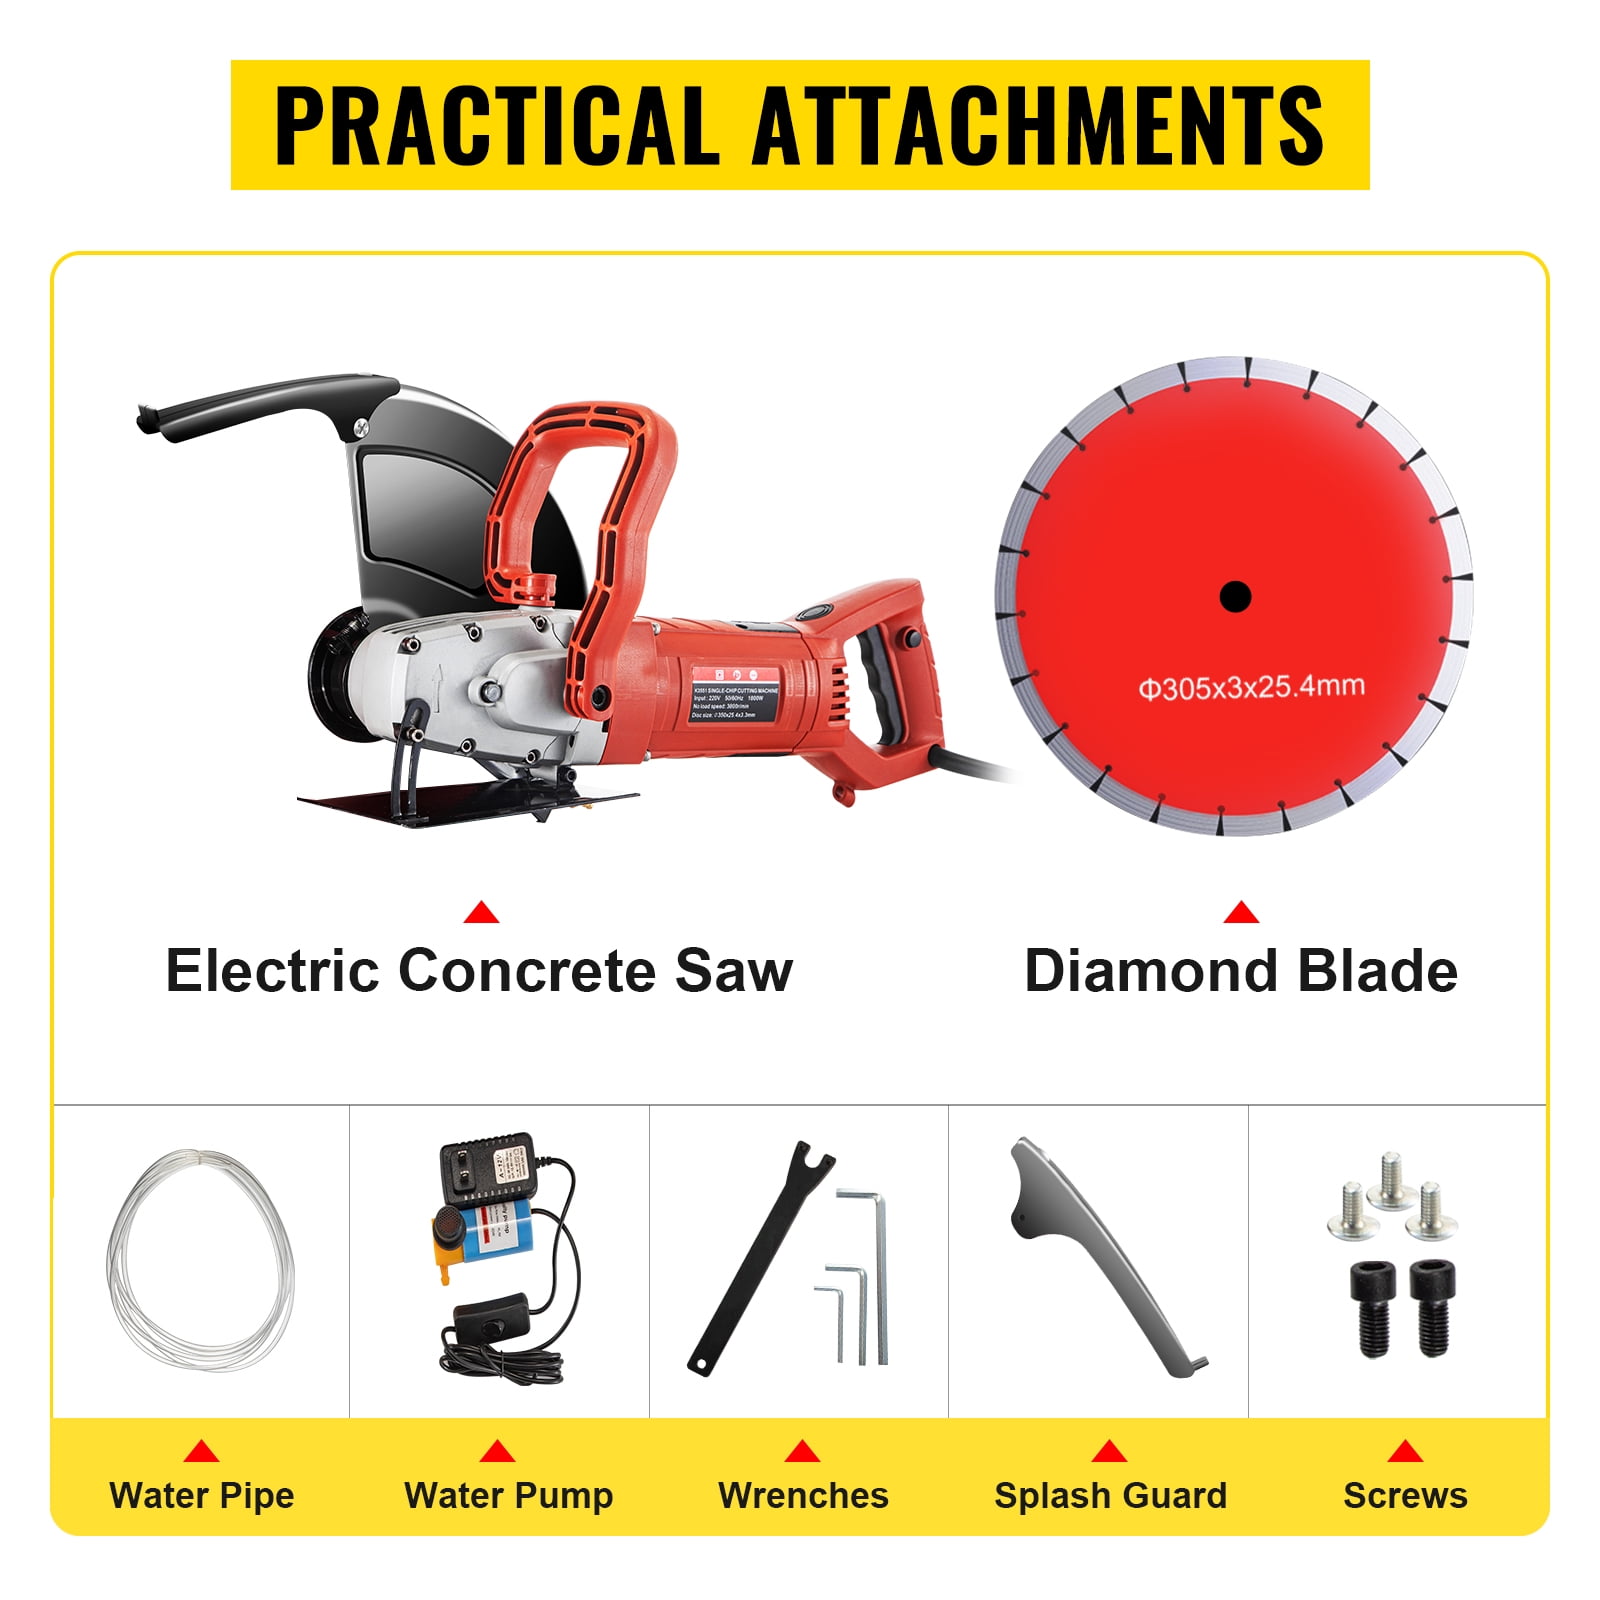 DNYSYSJ Electric Concrete Saw Cutter Circular Saw 14 Inch 3000W Wet Dry  Sawing with Blade and Tools for Granite, Brick, Porcelain, Reinforced  Concrete